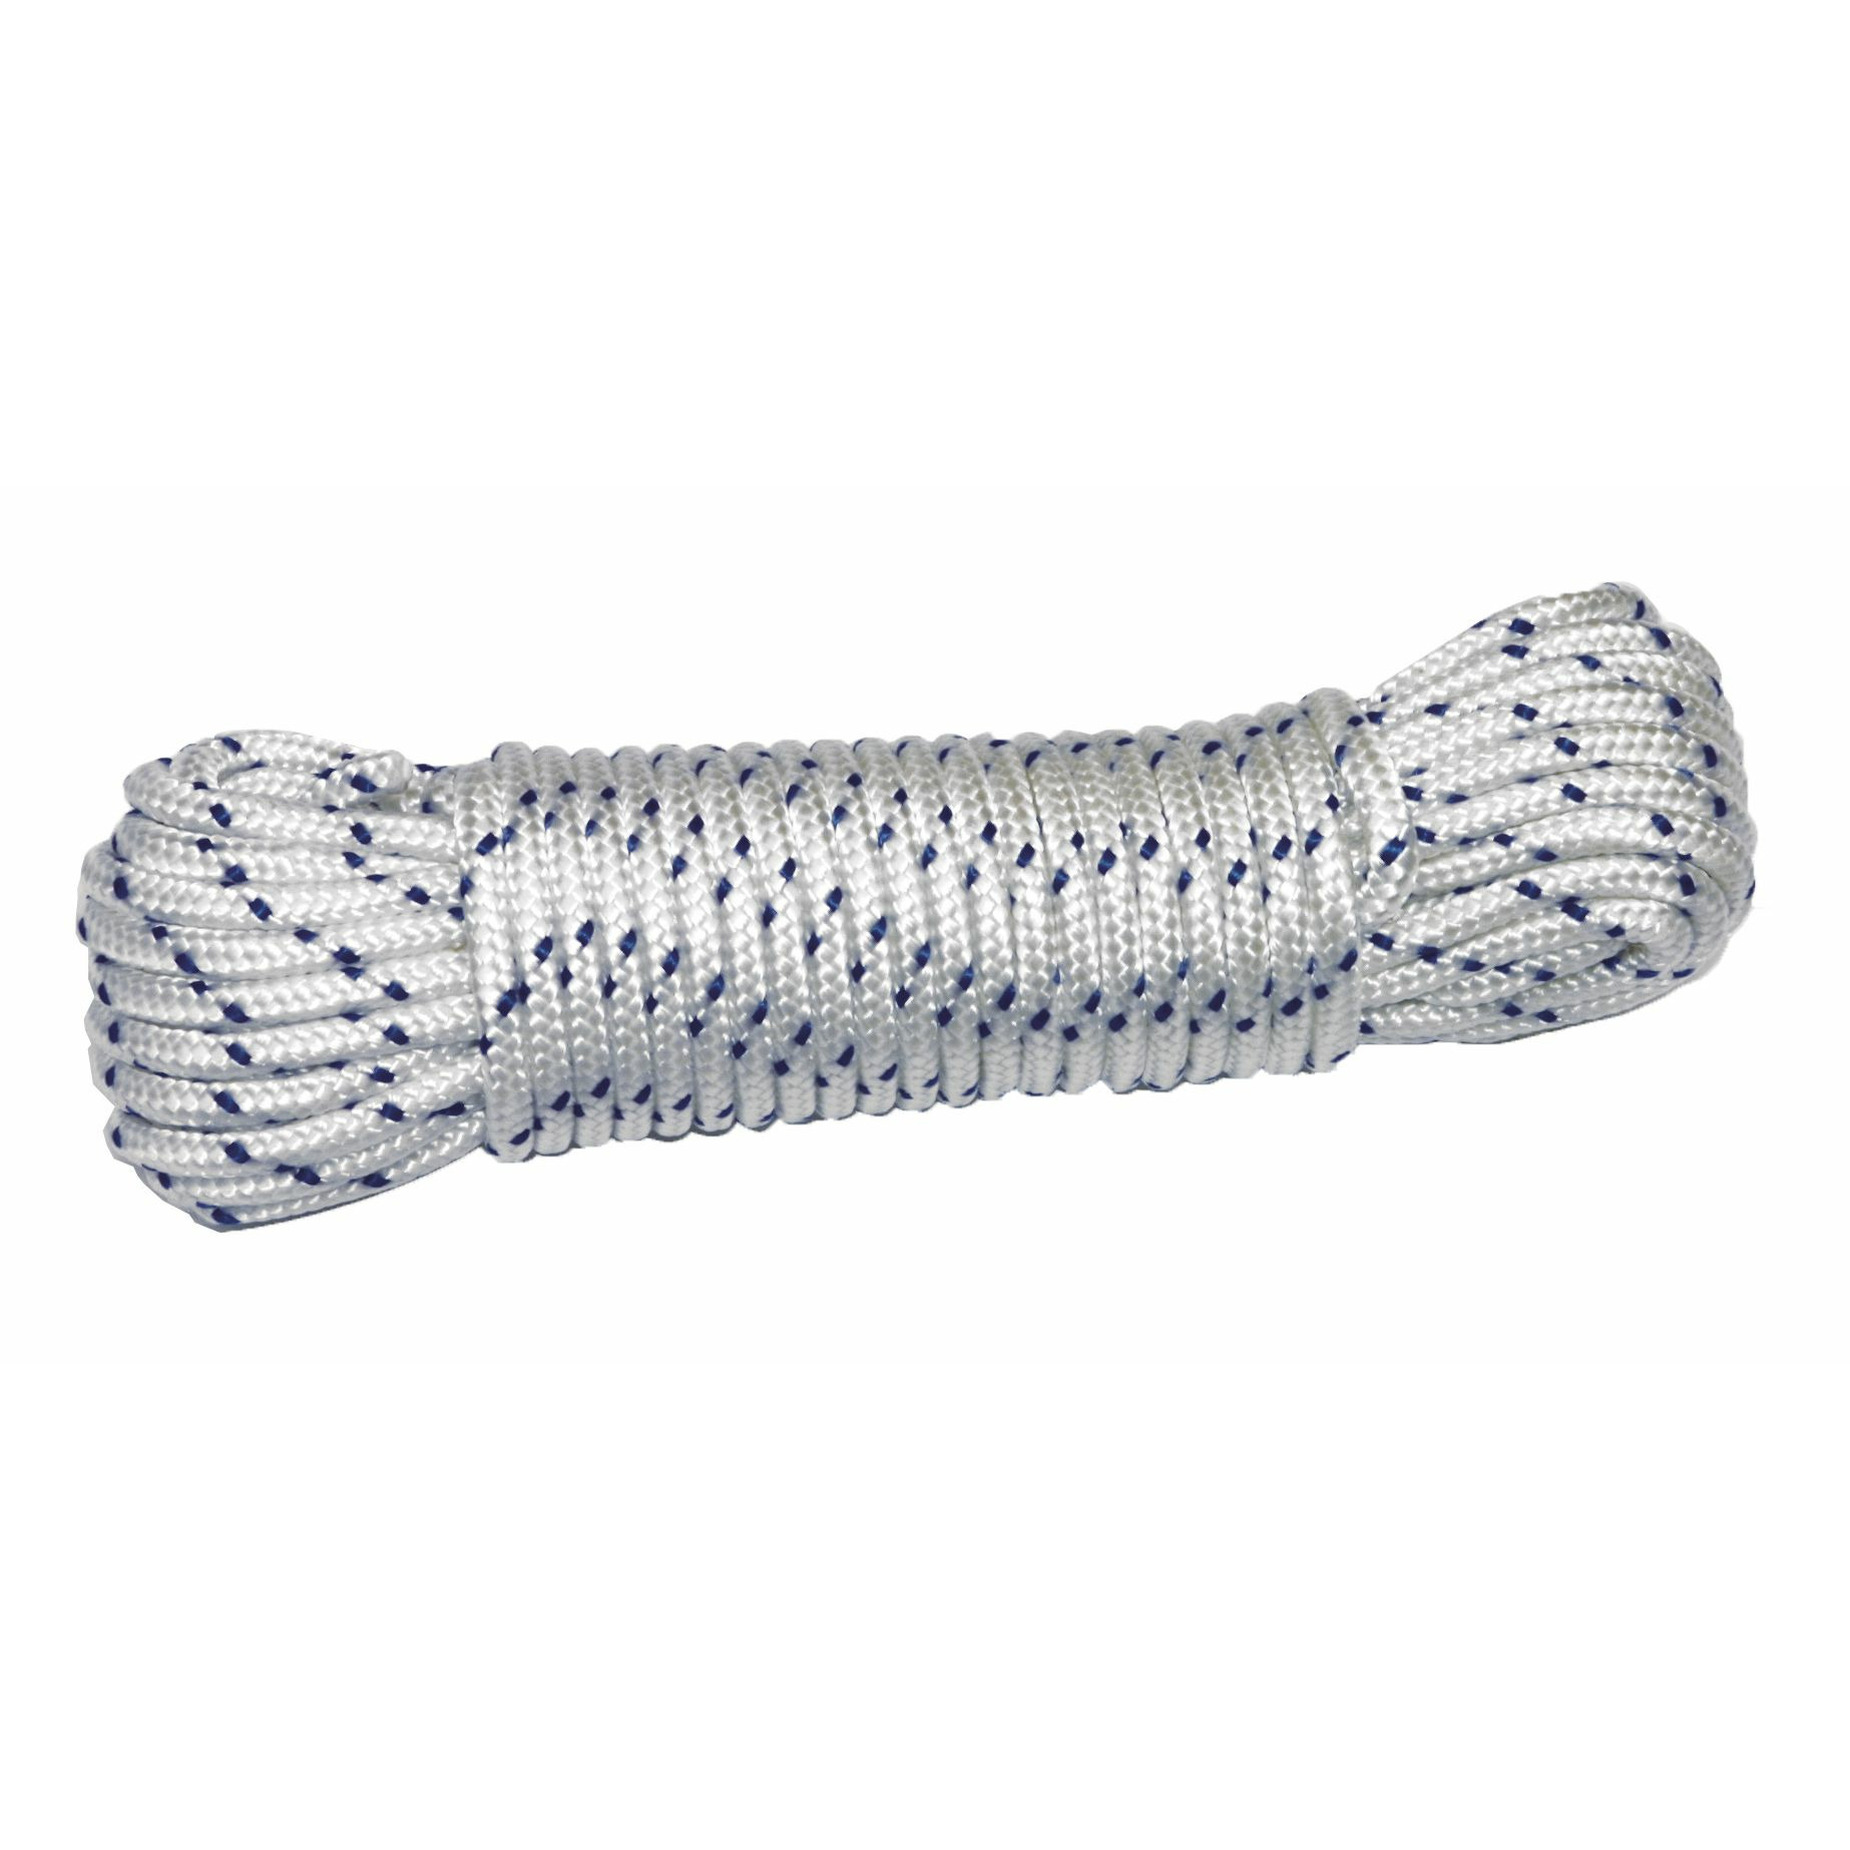 AMIG paracord touw 20 meter D6mm 400kg nylon-polyester wit-blauw